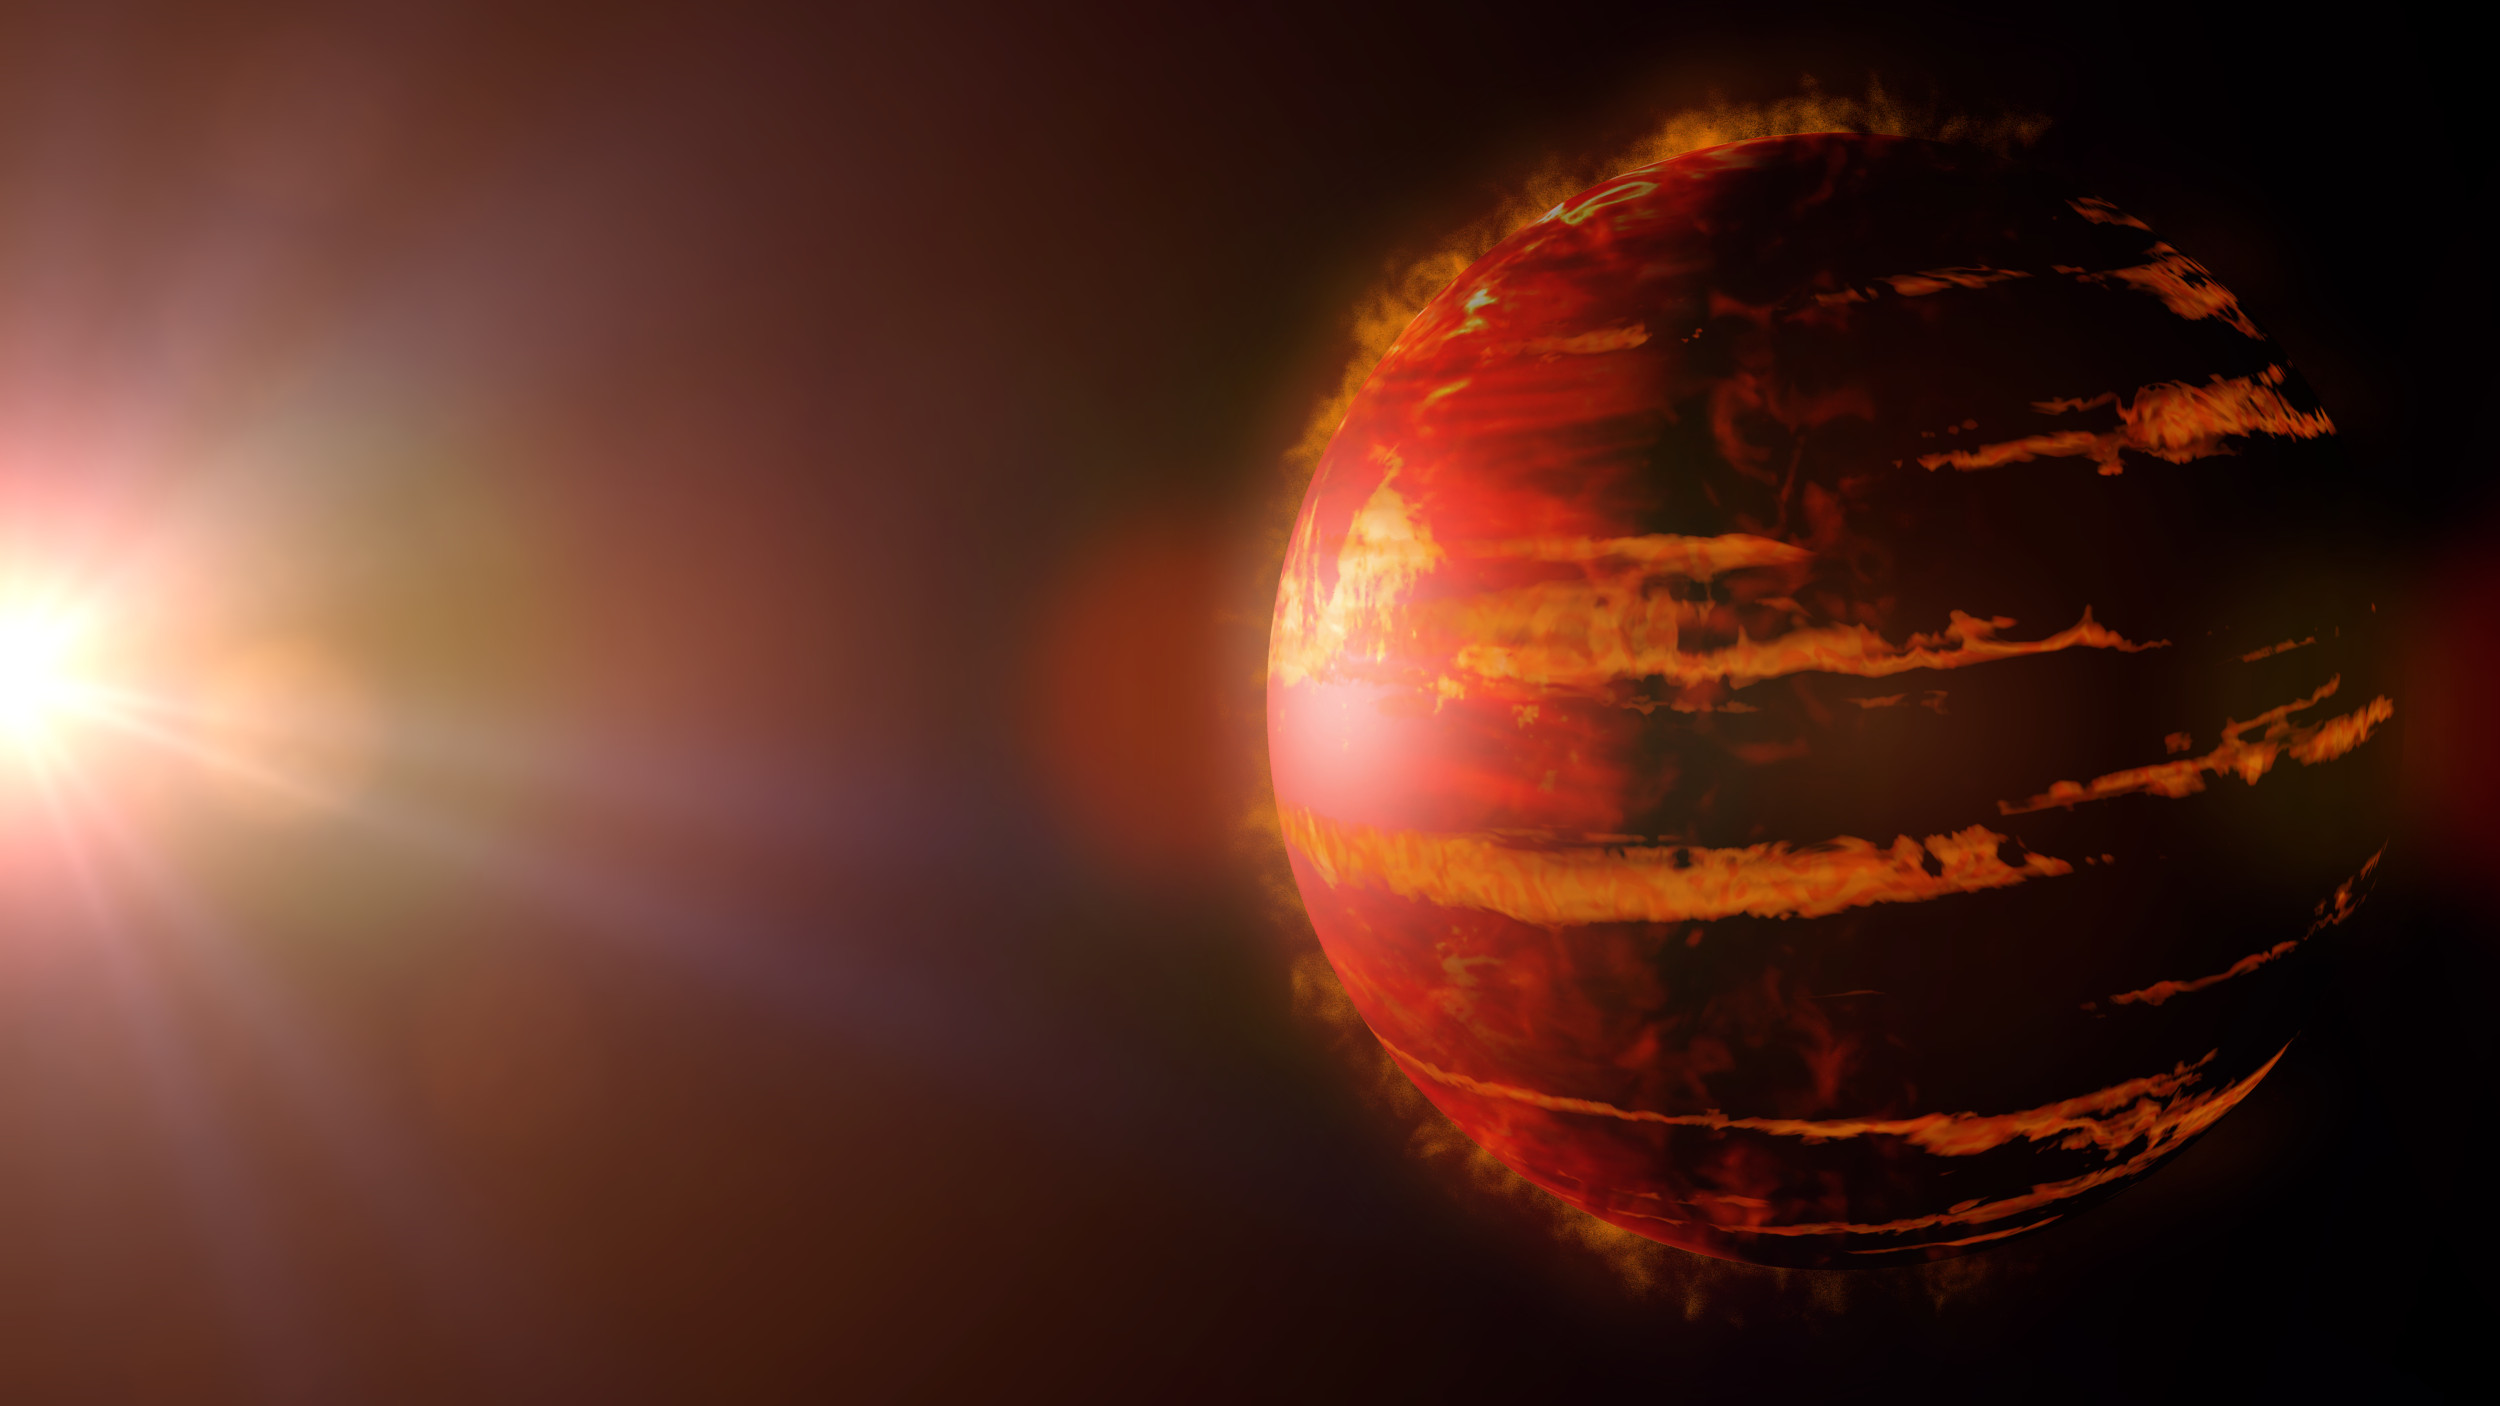 Brown Dwarf in Our Solar System